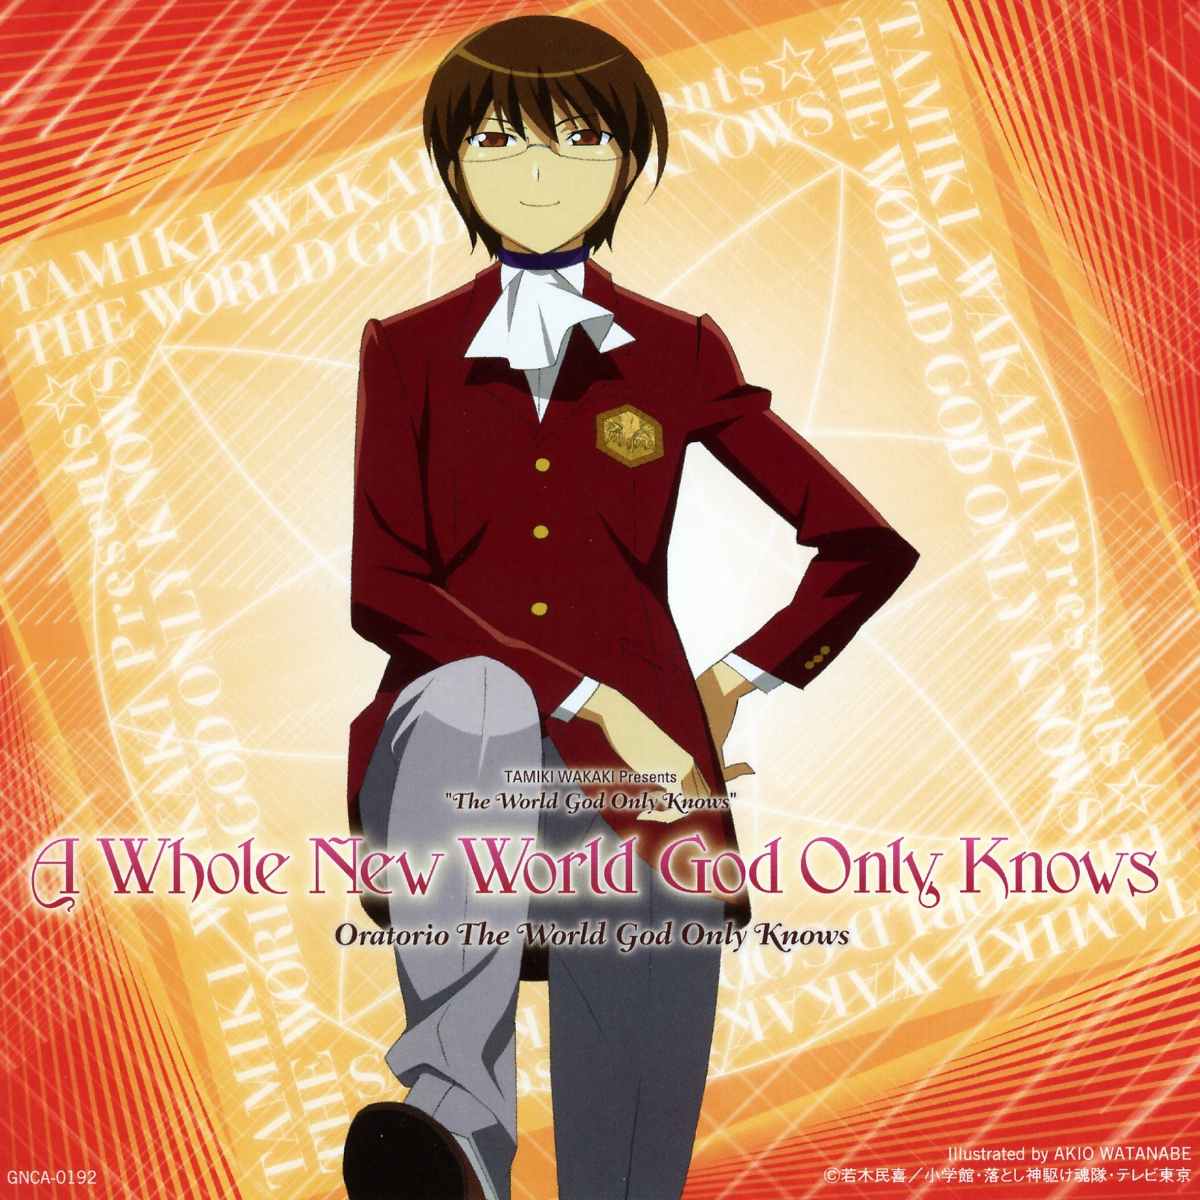 Oratorio The World God Only Knows - A Whole New World God Only Knows